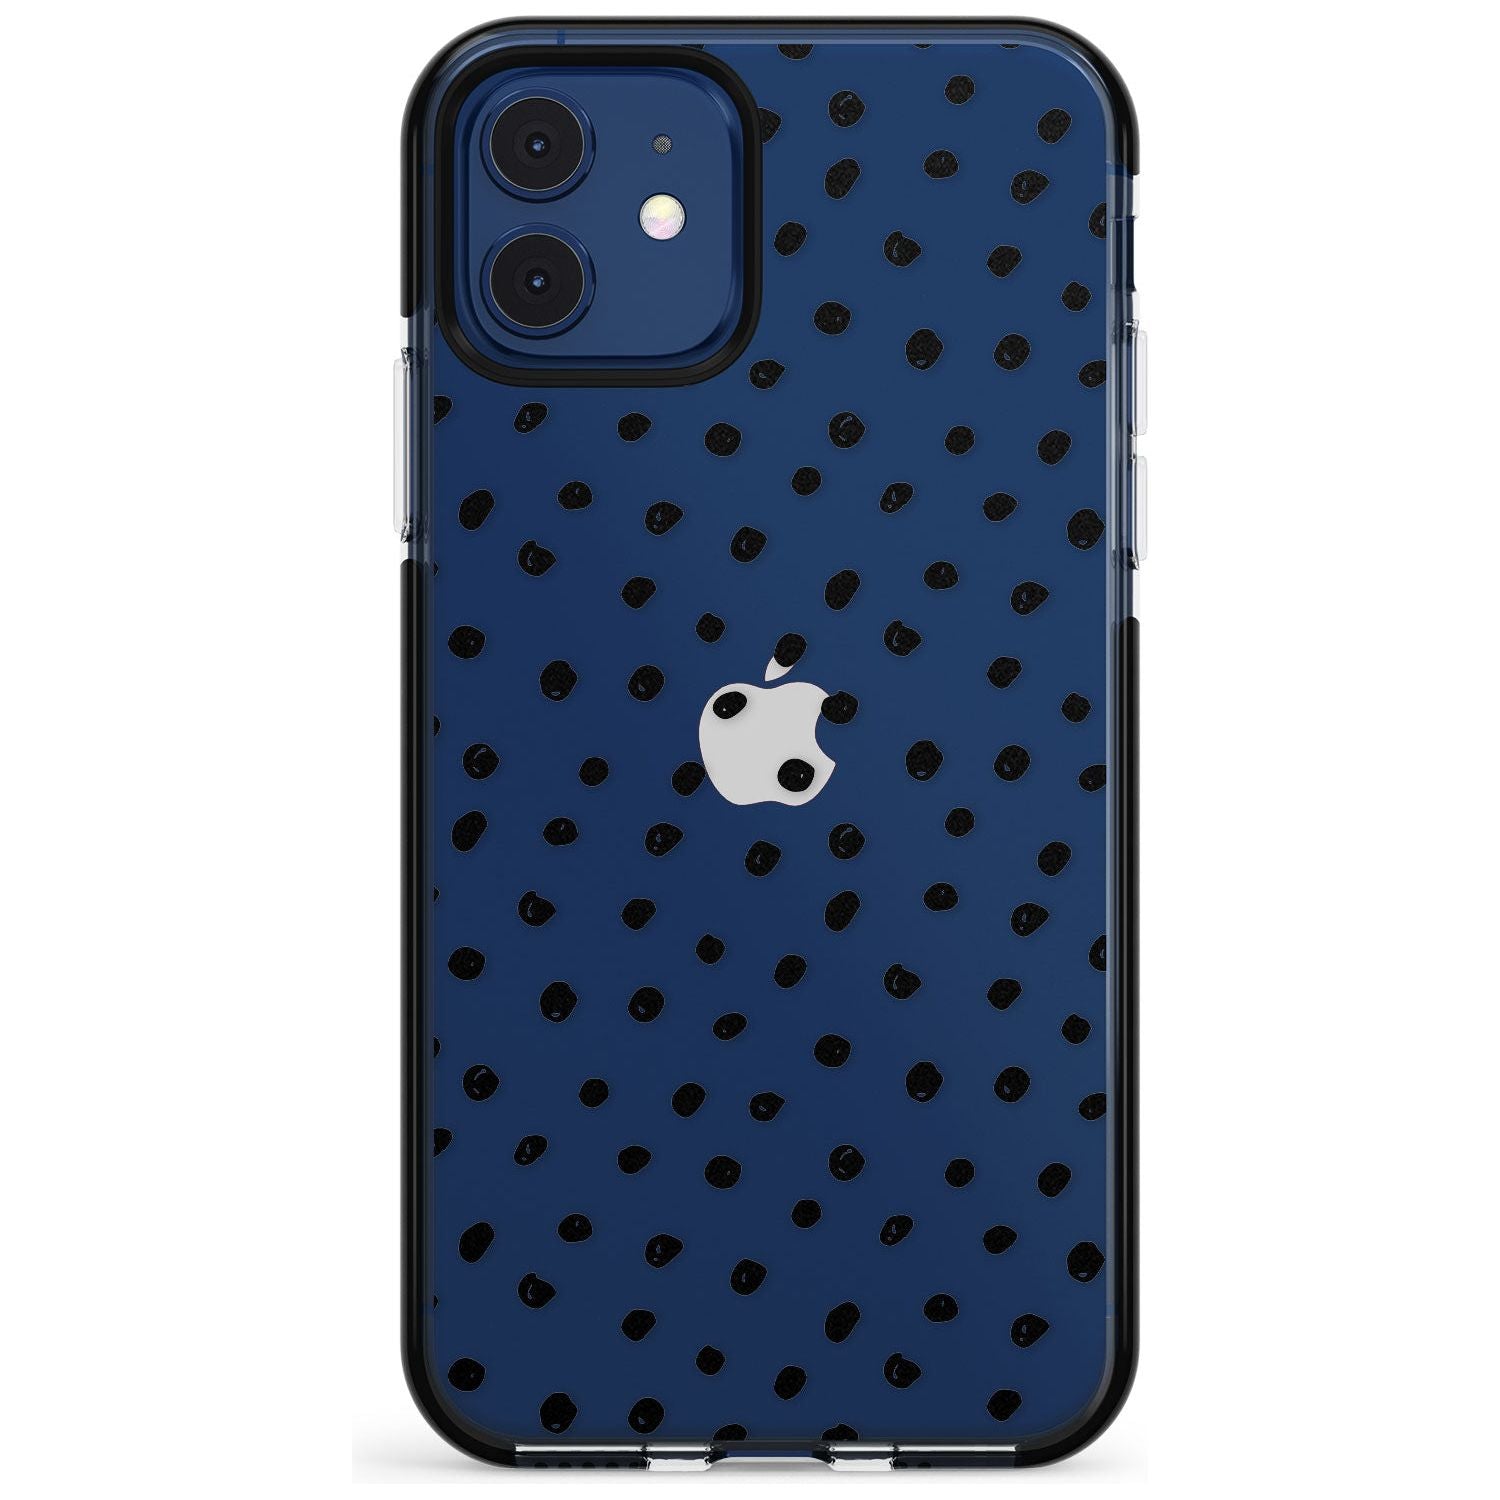 Messy Black Dot Pattern Pink Fade Impact Phone Case for iPhone 11 Pro Max